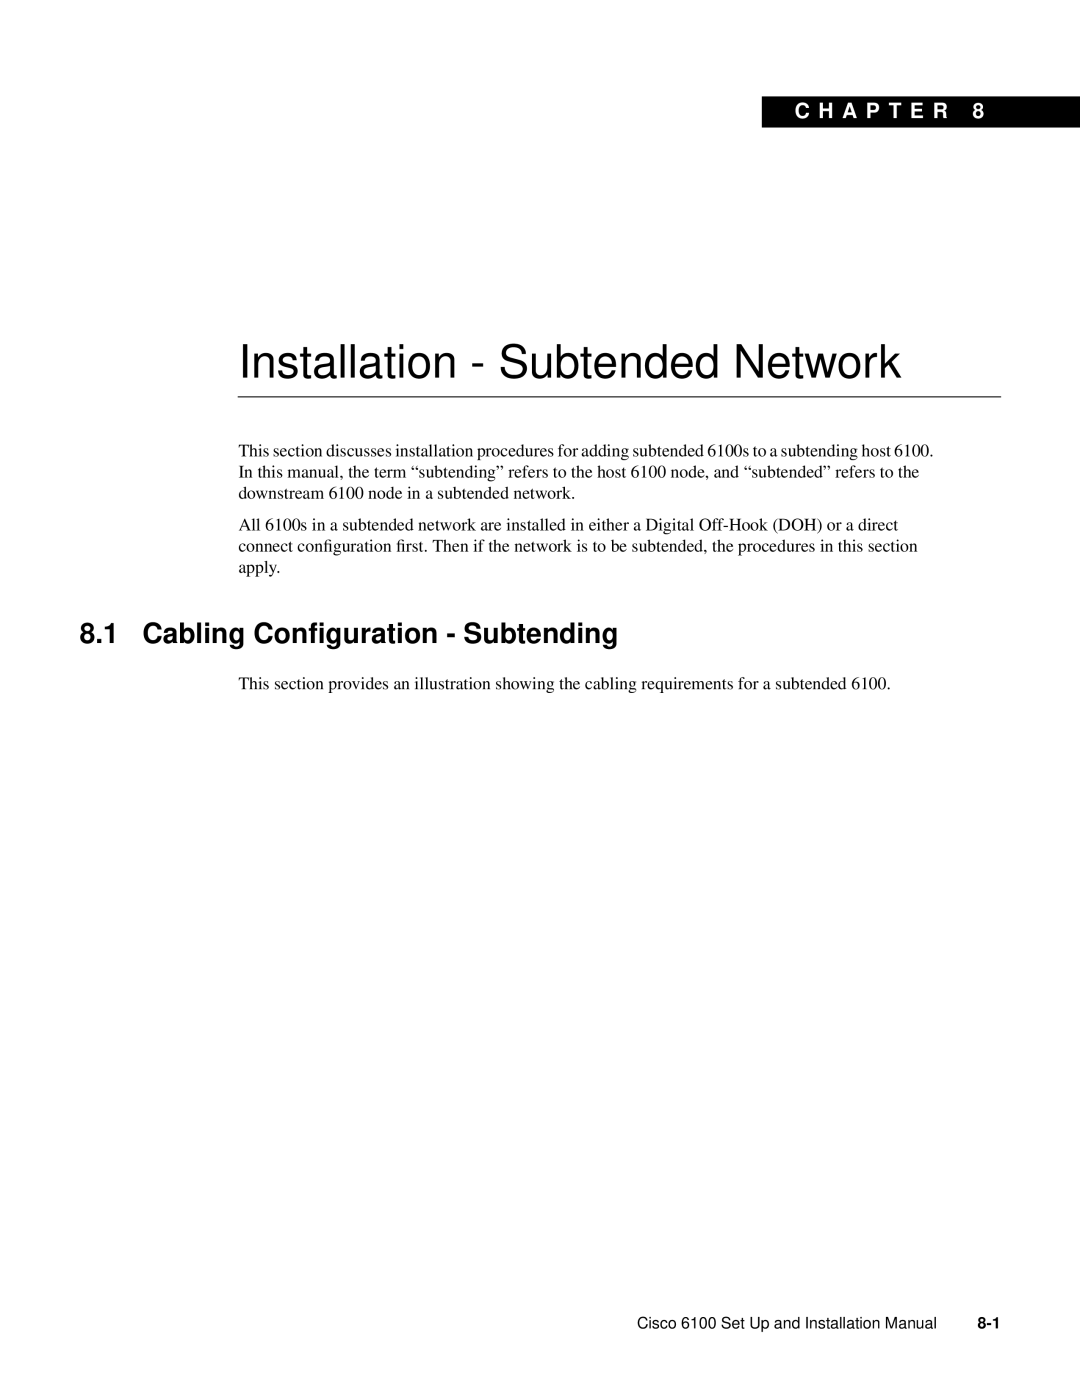 Cisco Systems 6100 installation manual Cabling Conﬁguration - Subtending, Installation - Subtended Network, C H A P T E R 